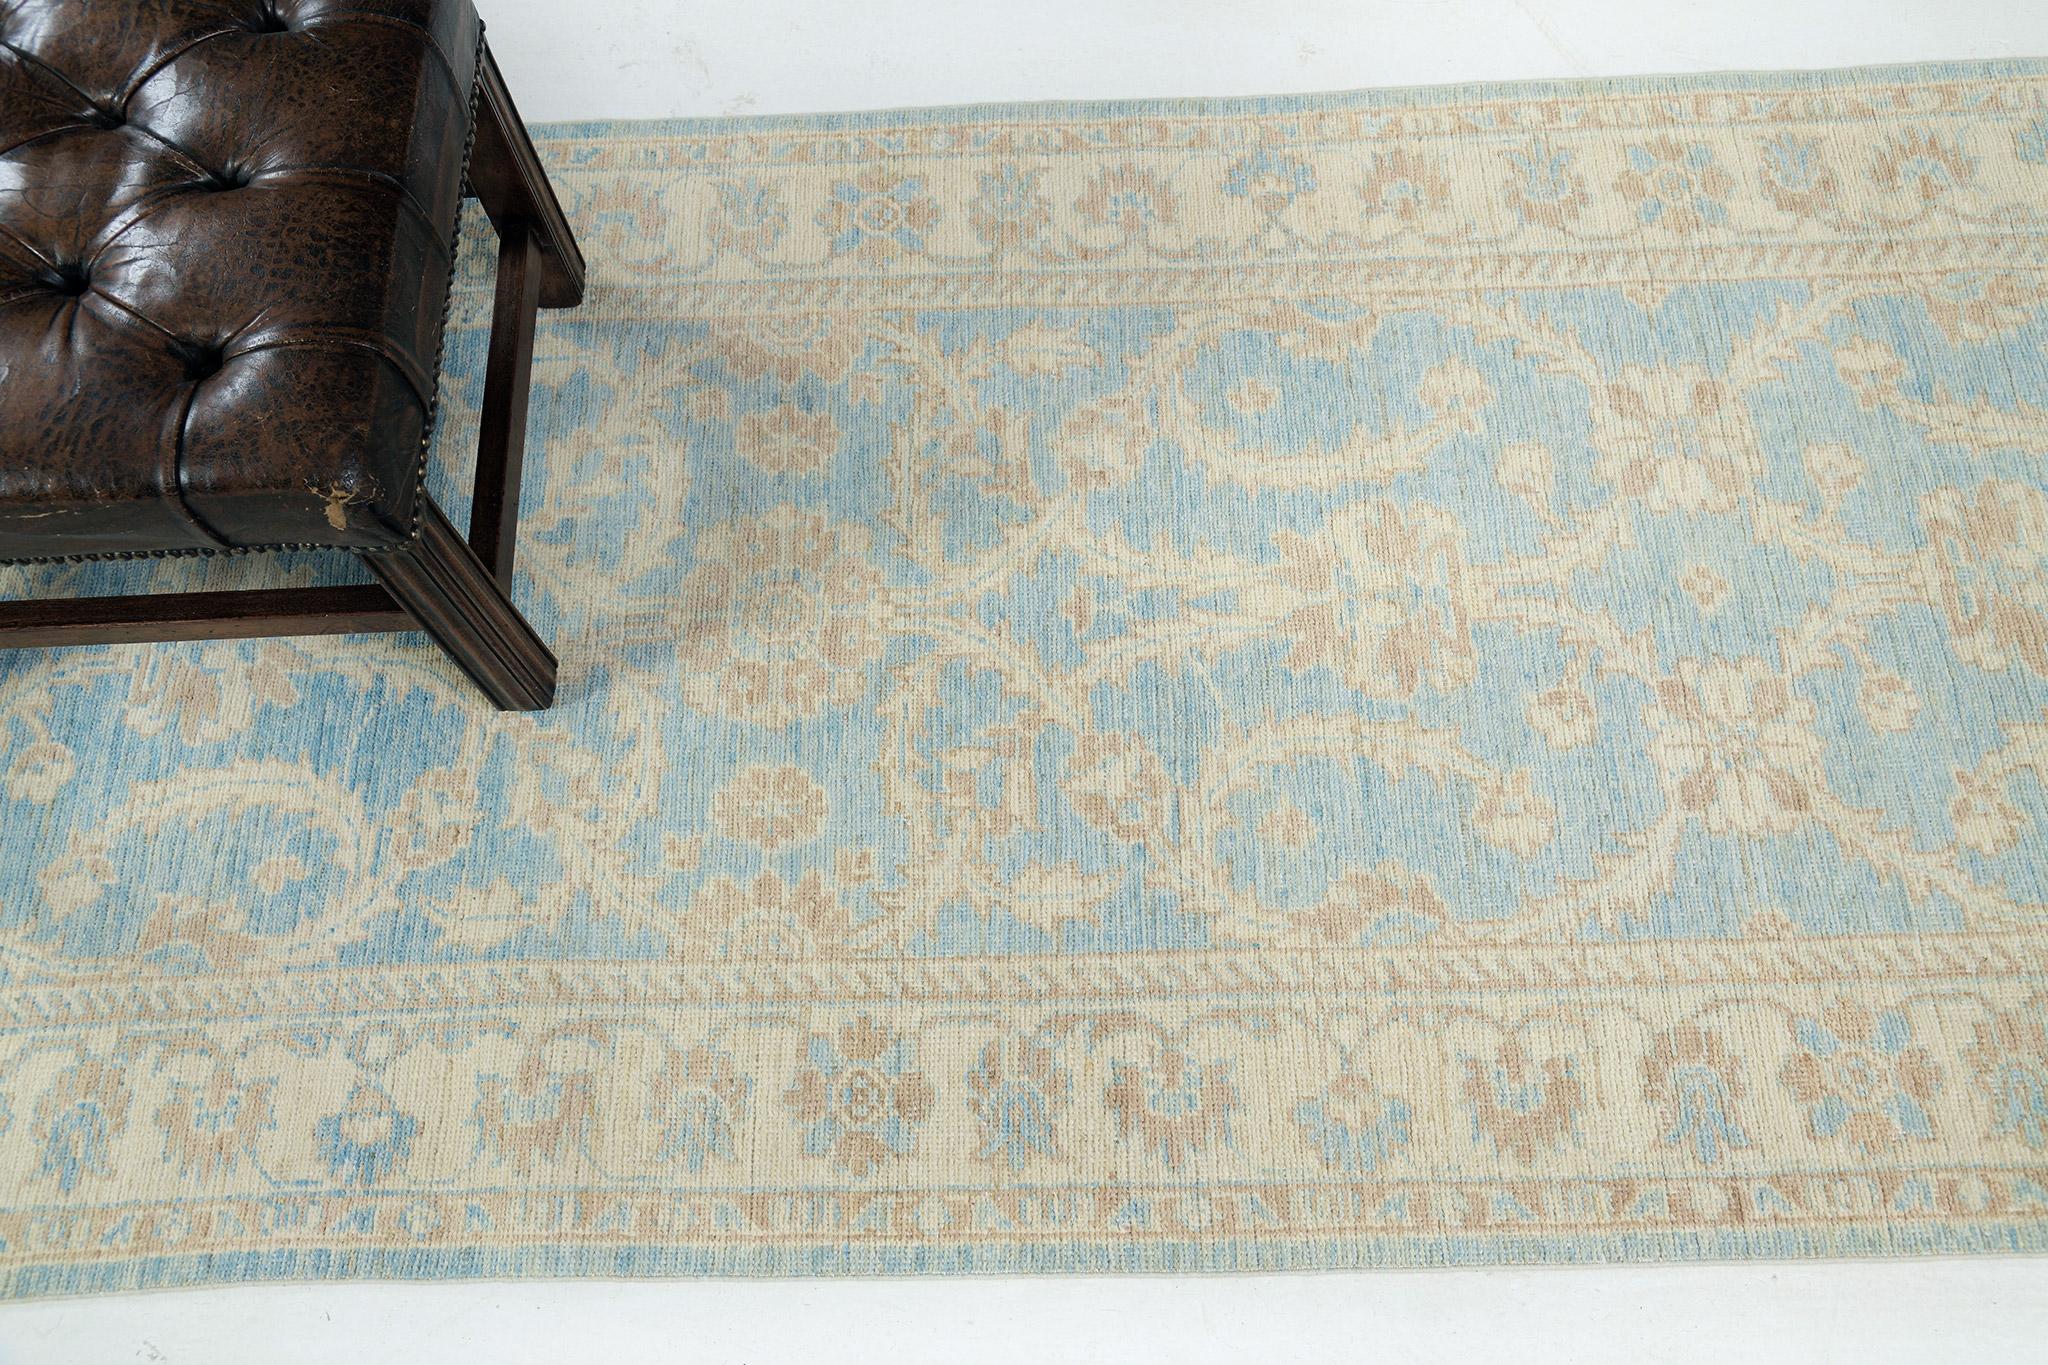 Remarkable vines are engaged with various embellishments and symbolic elements in oatmeal, cream, and gold accents in the cerulean blue field and are featured together with stunning borders that make the rug more charming. This will be an excellent